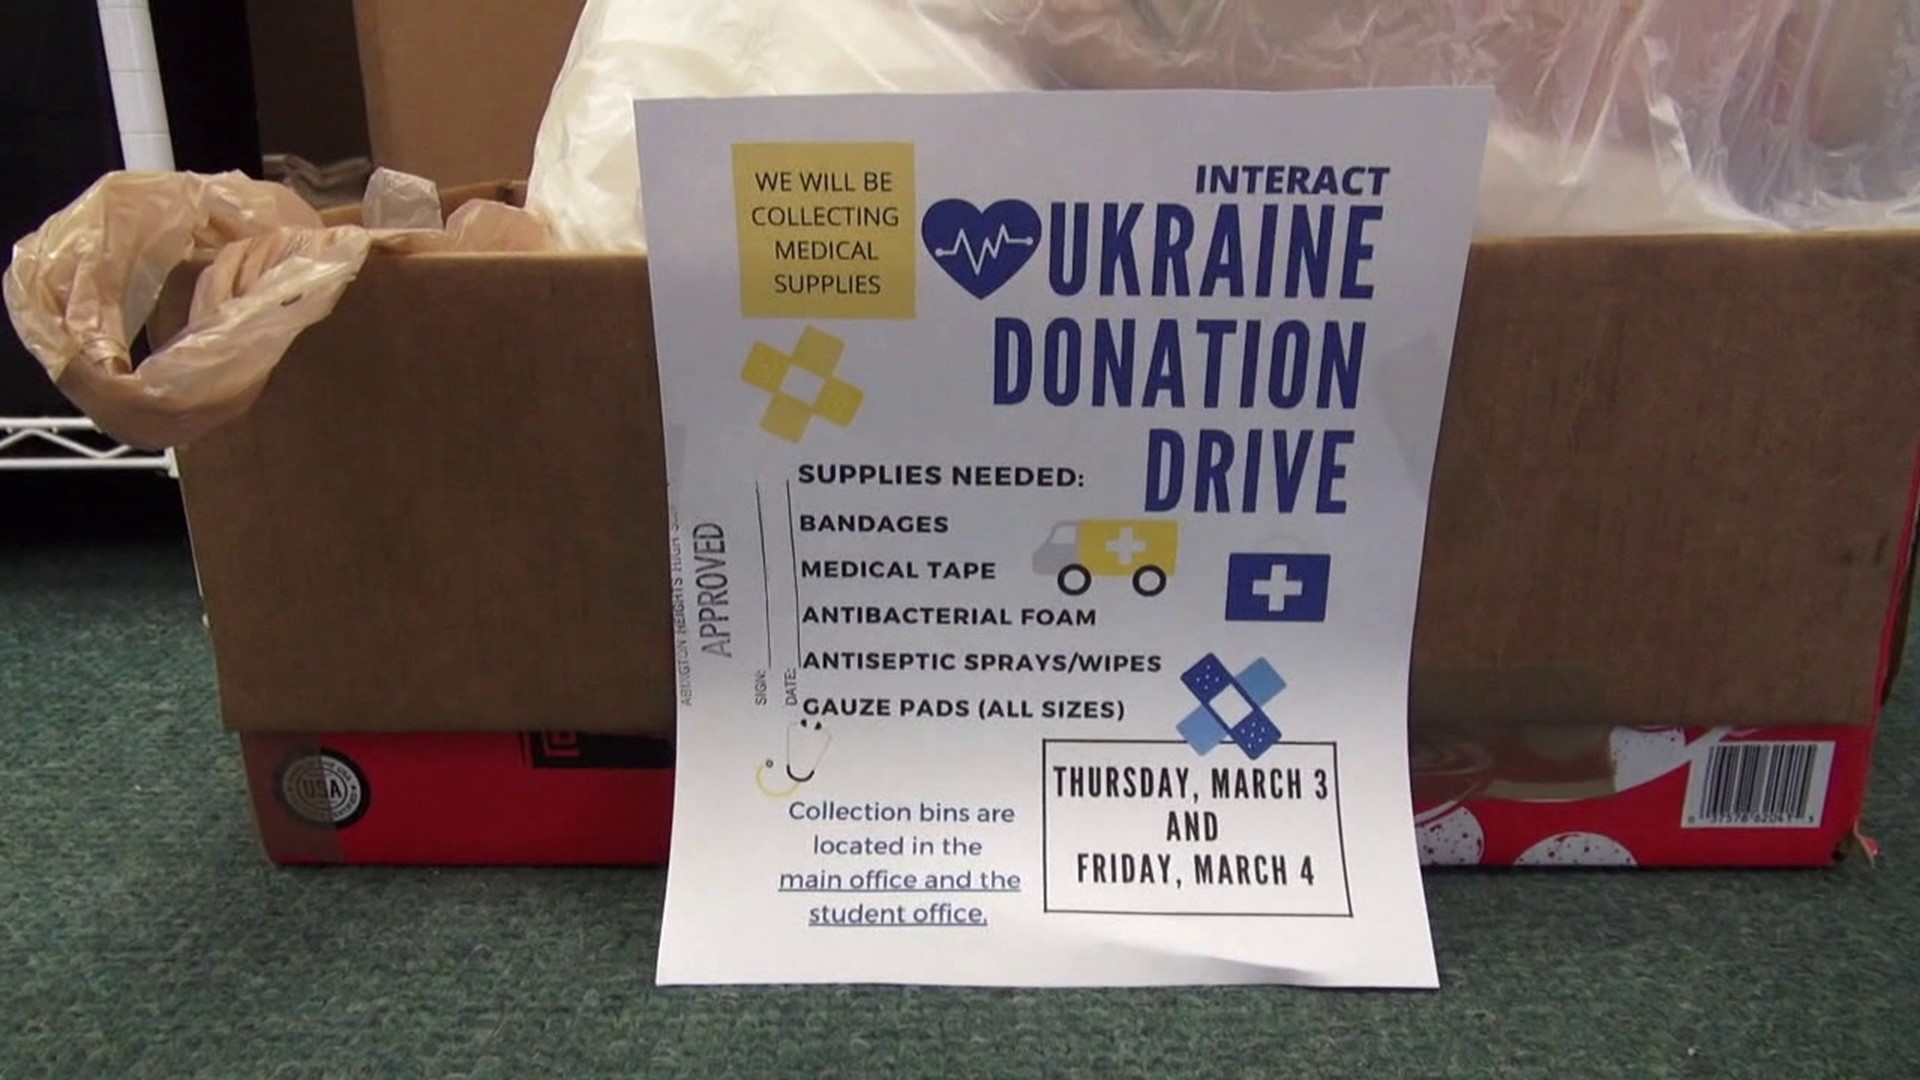 A church in Scranton has received so many donations for Ukraine that they are asking for your help.